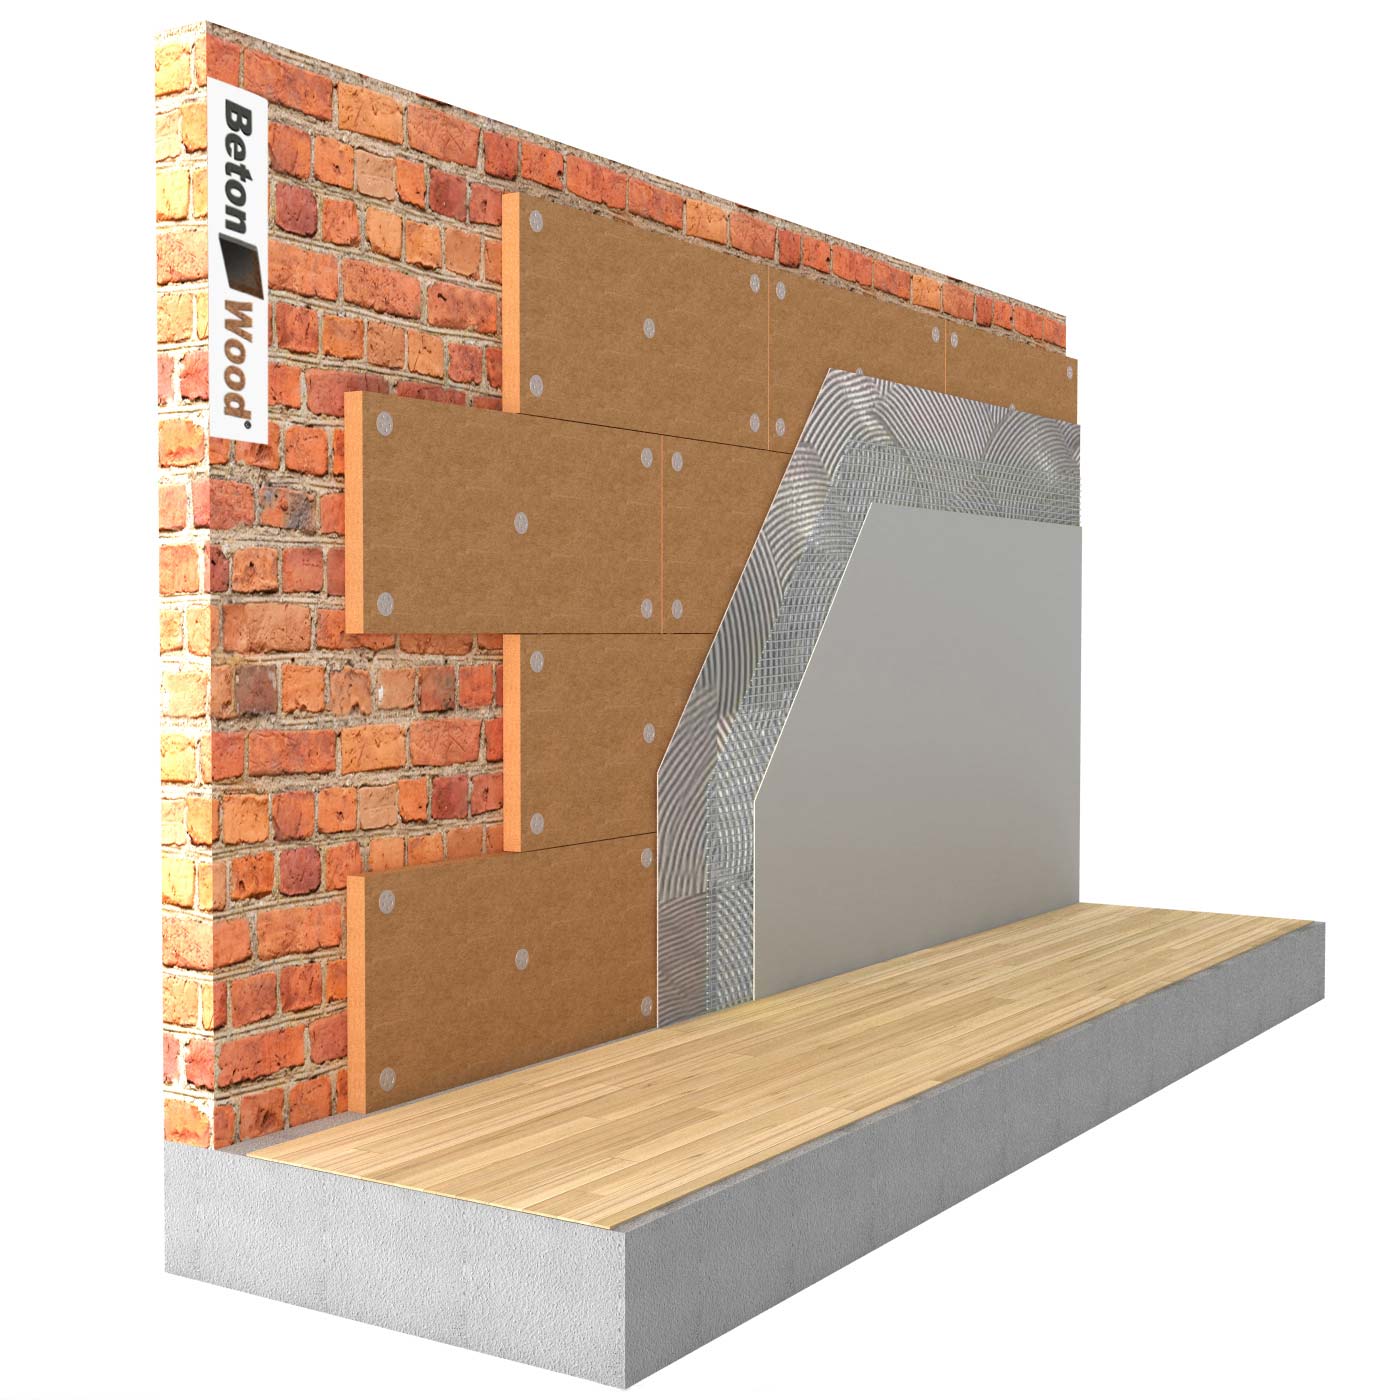 Internal thermal insulation system in Protect Fiber wood shop